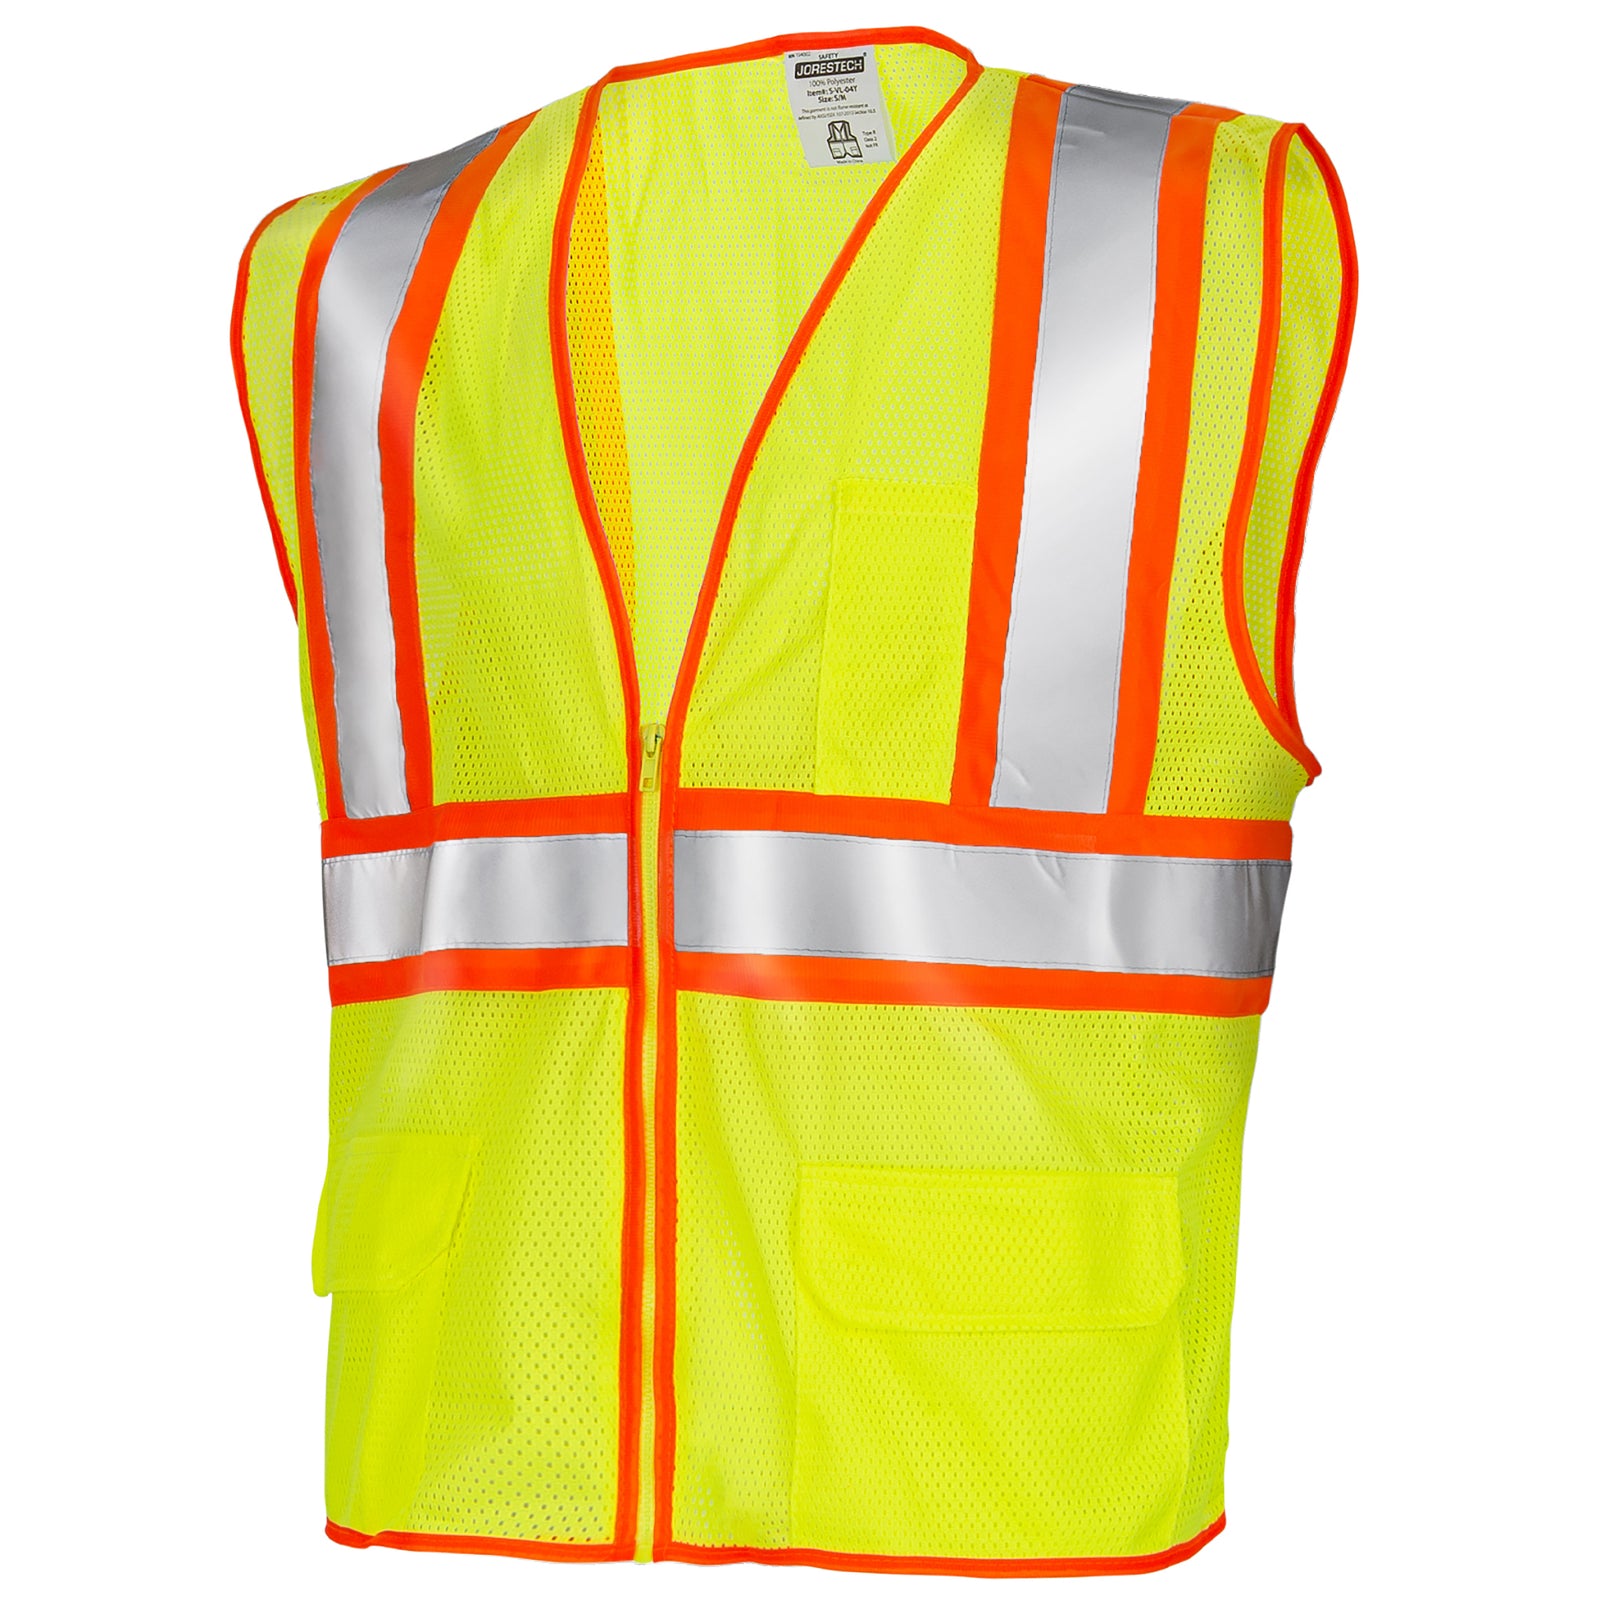 Two-Tone Reflective Safety Vest with Pockets | ANSI Class 2